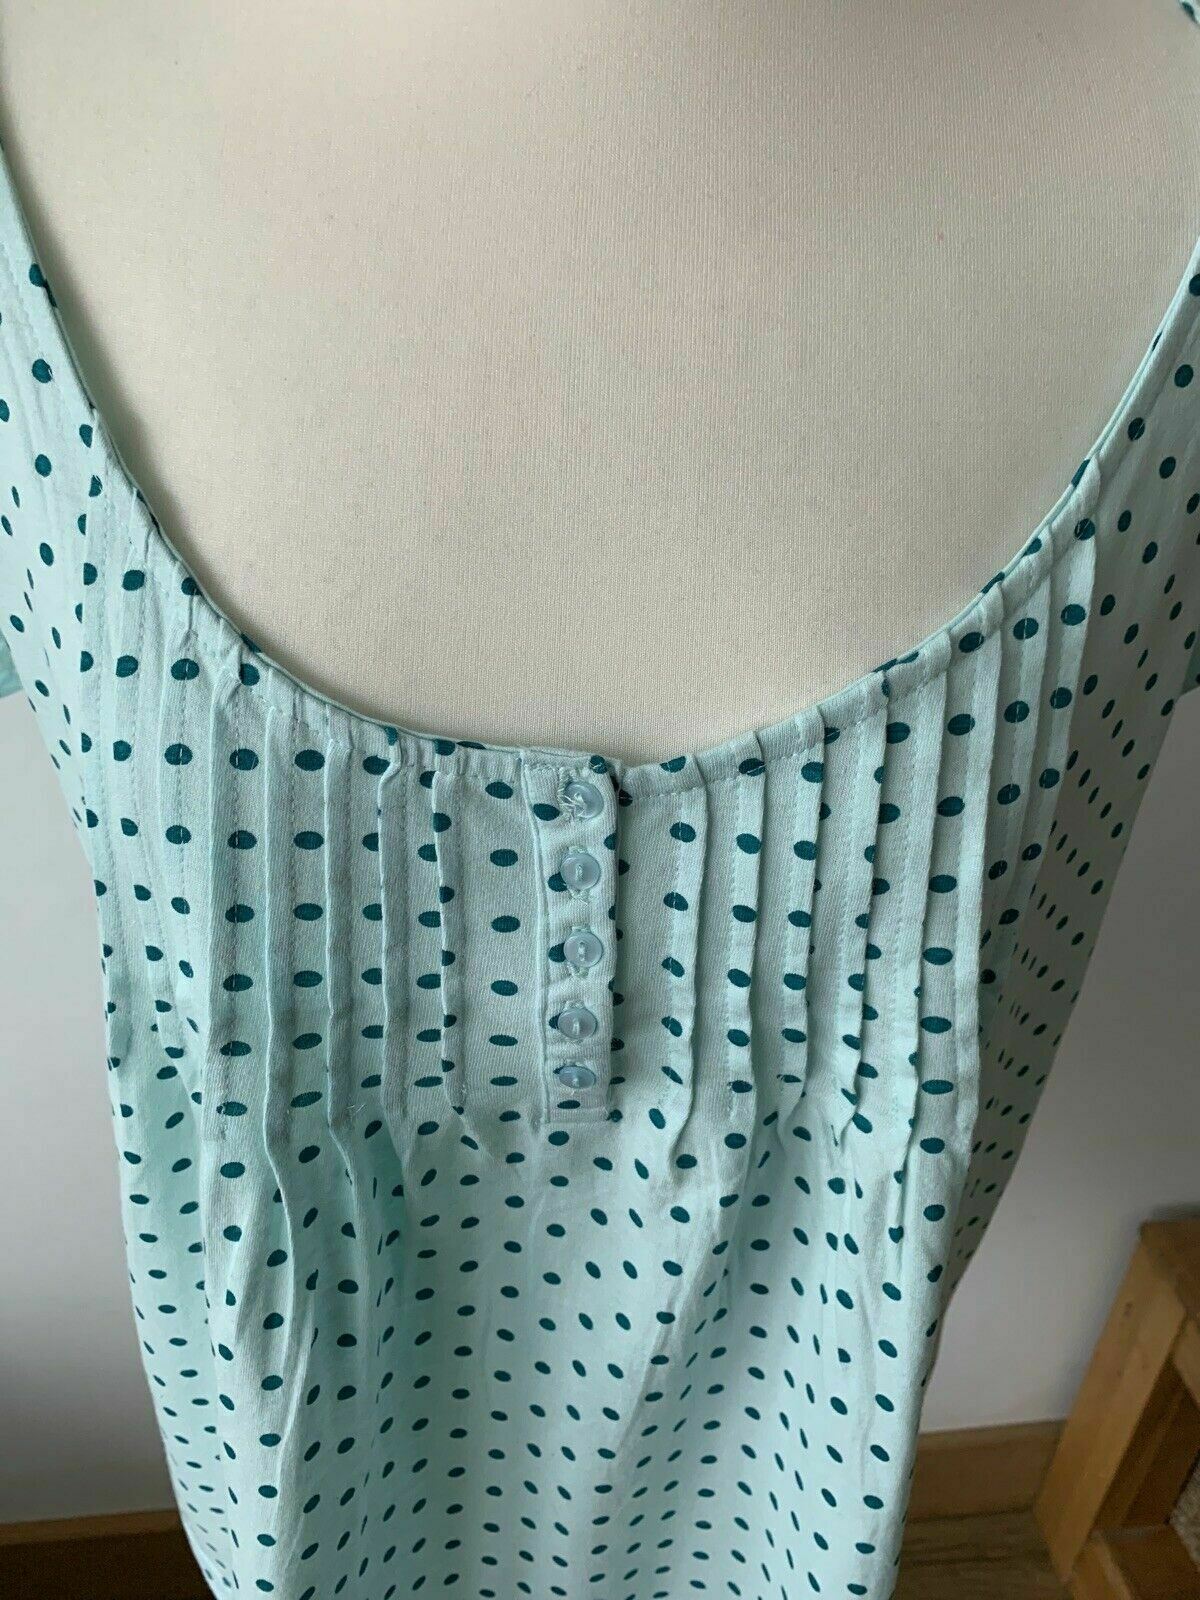 Blancheporte Light Teal Polka Dot Top Cotton Size 20 pit to pit 21.5"